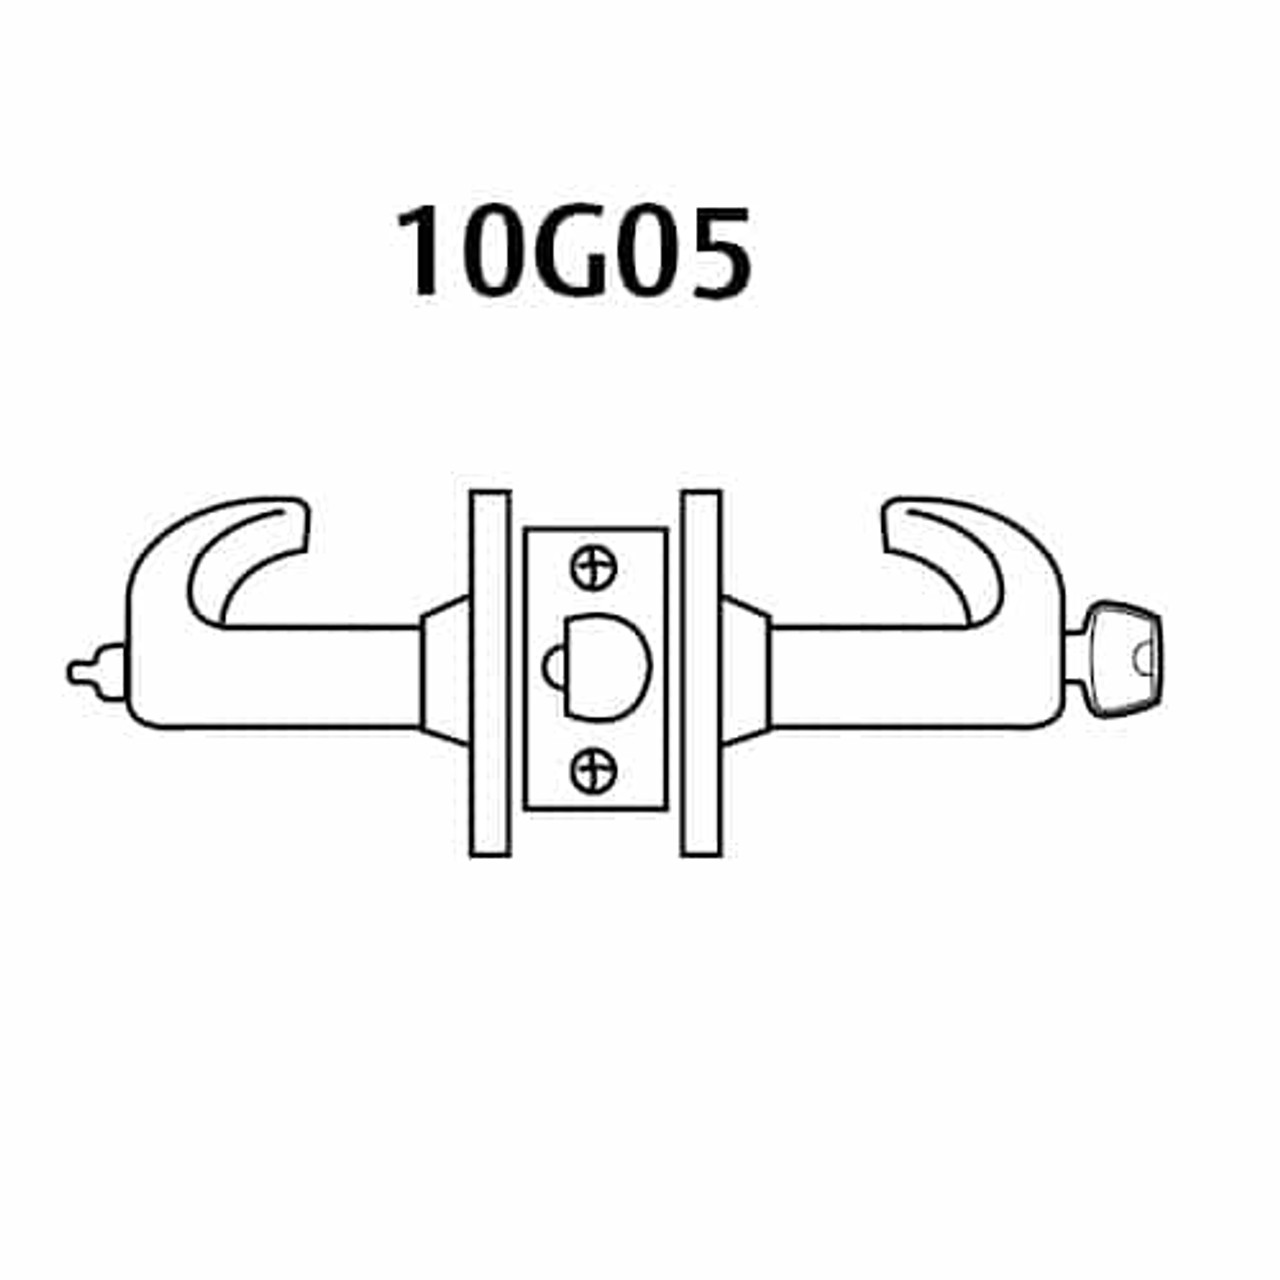 2870-10G05-LB-26 Sargent 10 Line Cylindrical Entry/Office Locks with B Lever Design and L Rose Prepped for SFIC in Bright Chrome